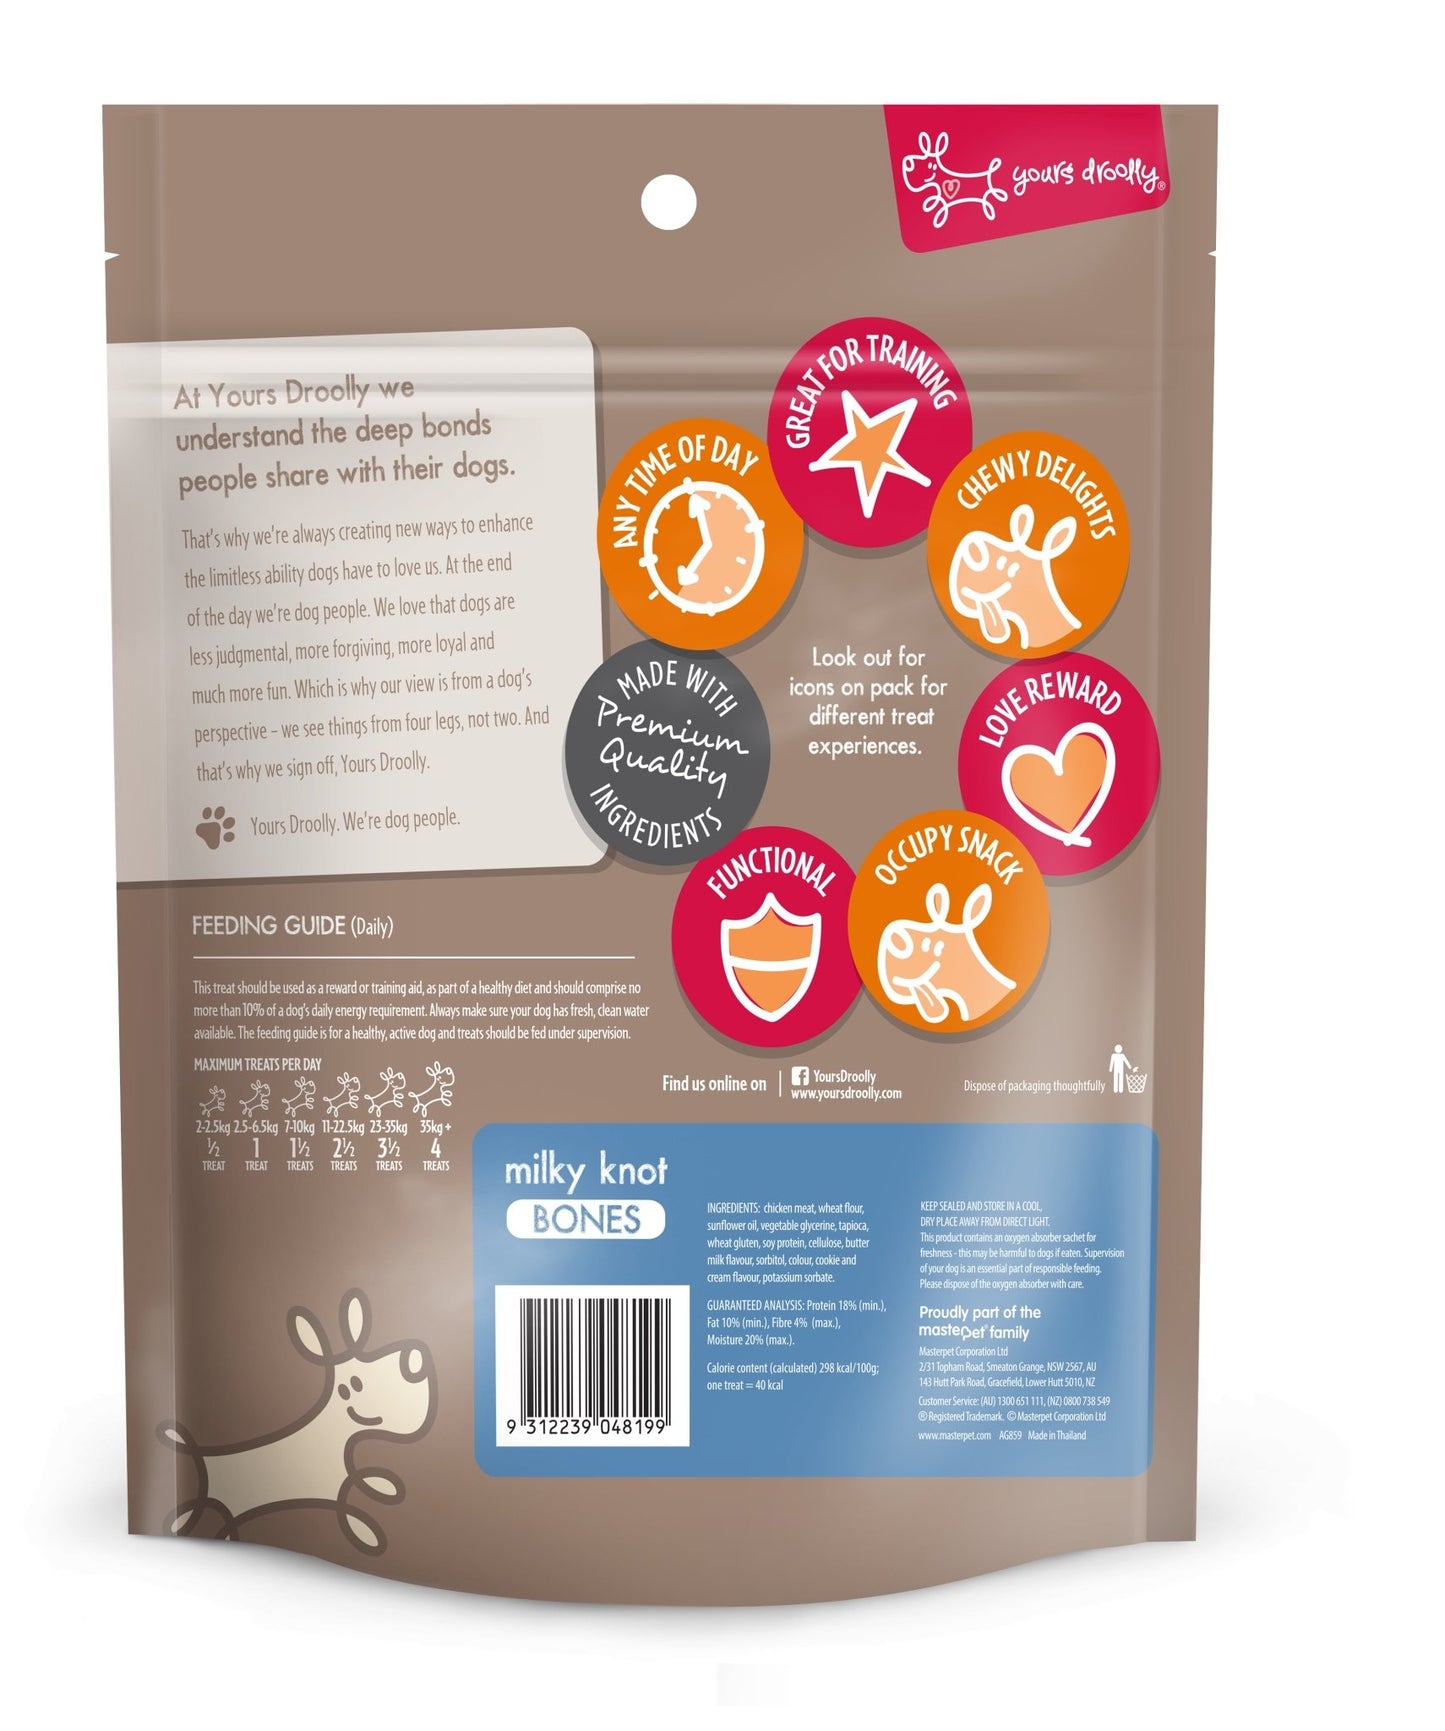 Yours Droolly Milky Knot Bones 450g - Woonona Petfood & Produce